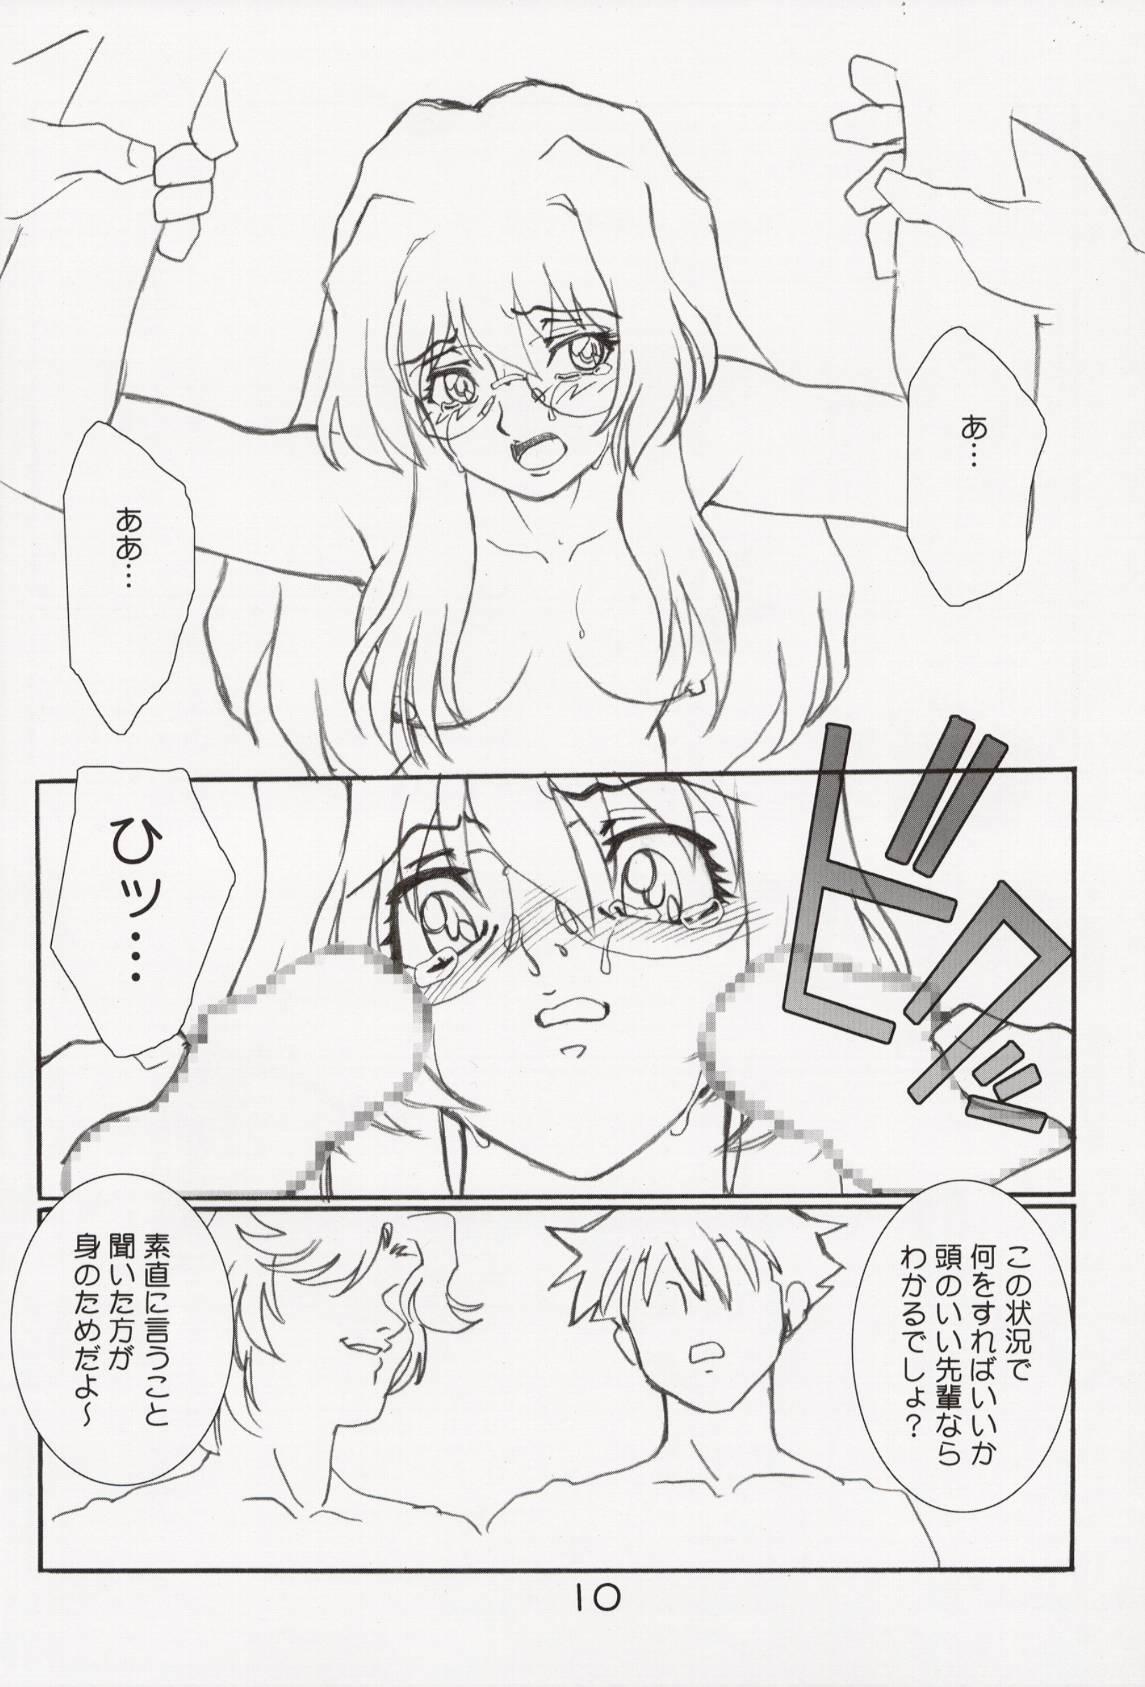 Ejaculations Sudden Onegai Twins SYNDROME - Onegai twins Panocha - Page 11